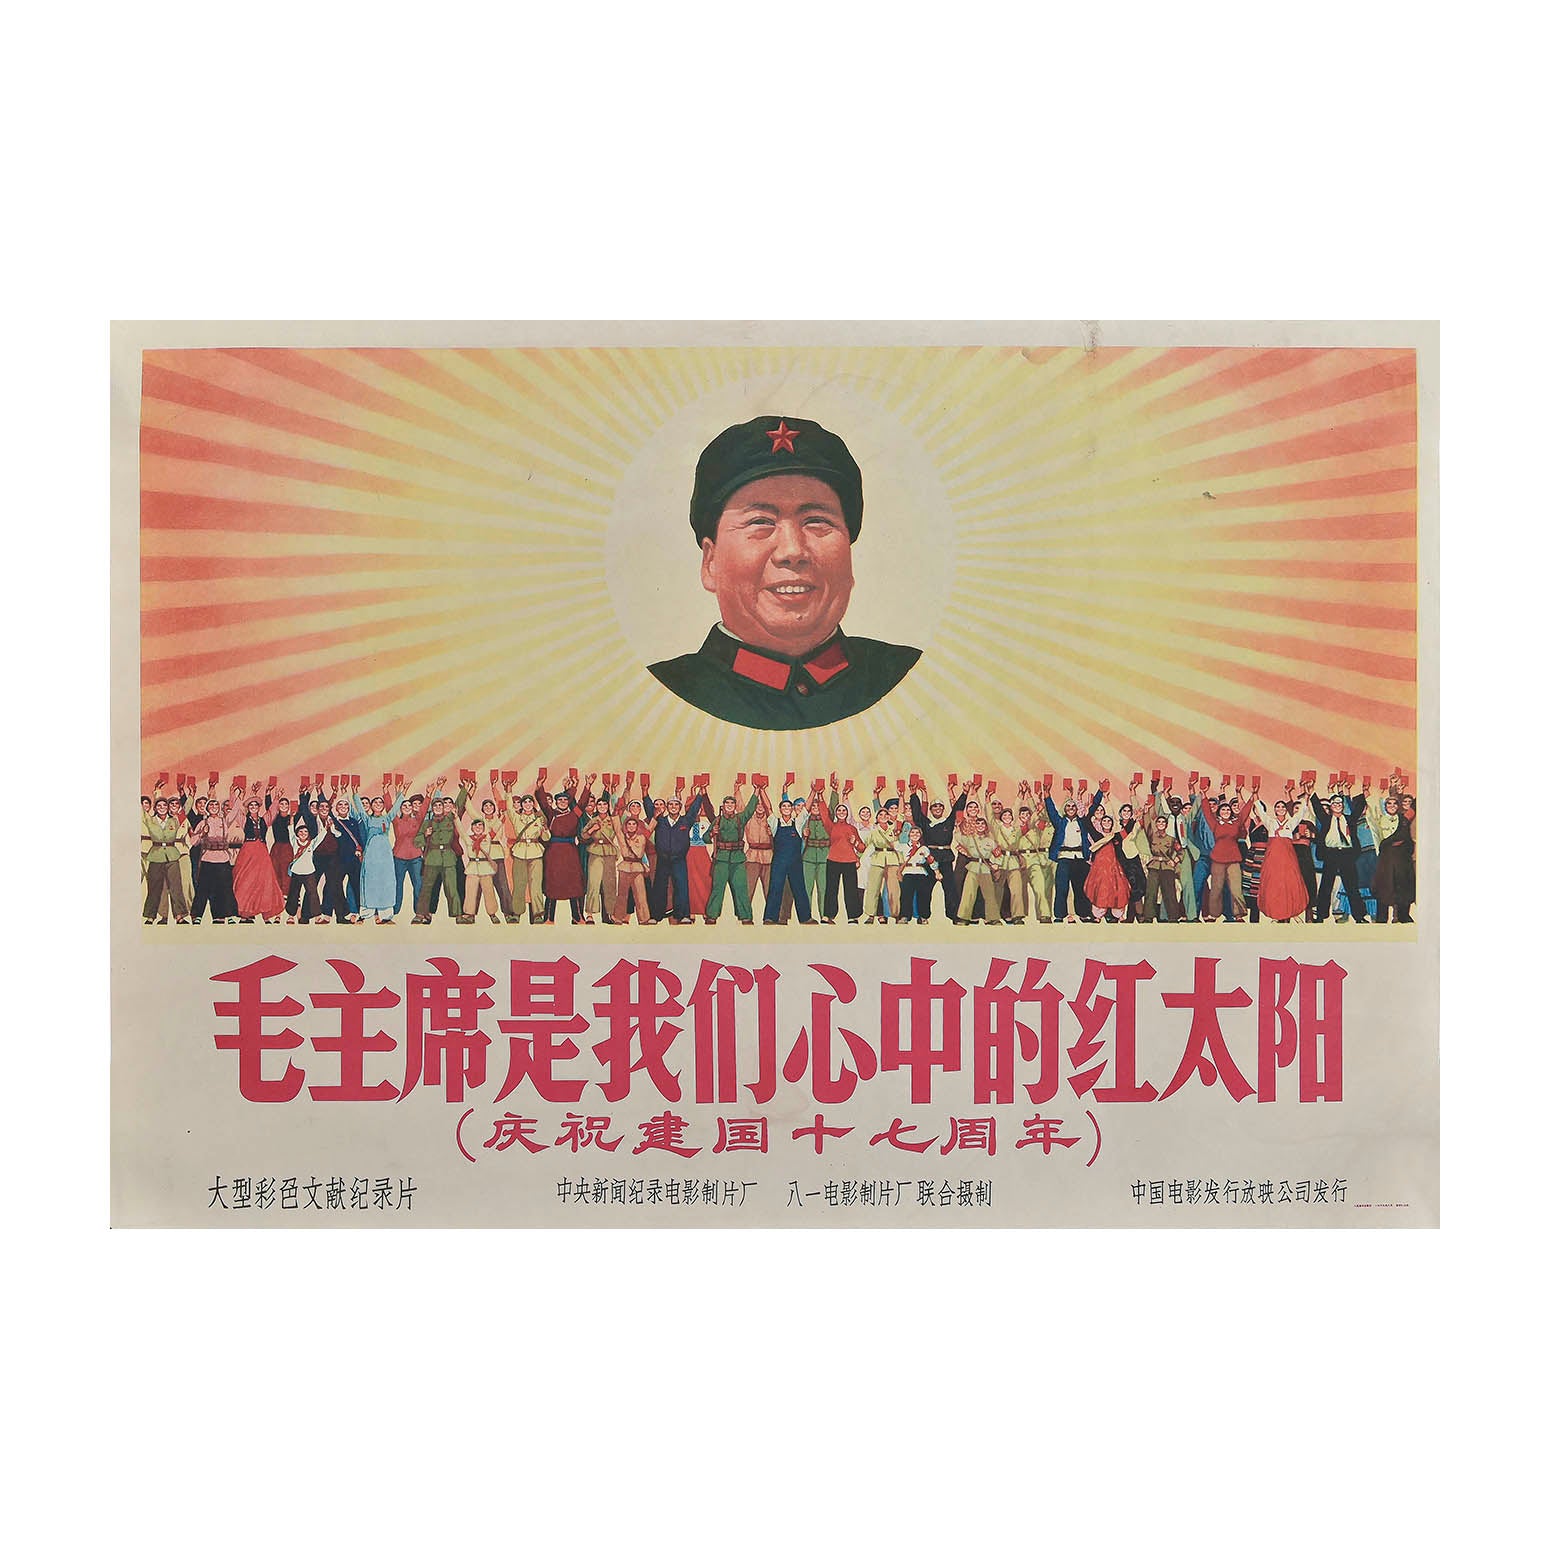 Original Chinese Communist Party poster, c. 1967. The image depicts Chairman Mao as the centre of the sun, with a wide variety of Chinese citizens in the foreground holding aloft their copies of Quotations from Chairman Mao Tse-tung (known as ‘The Little Red Book’ in the West).